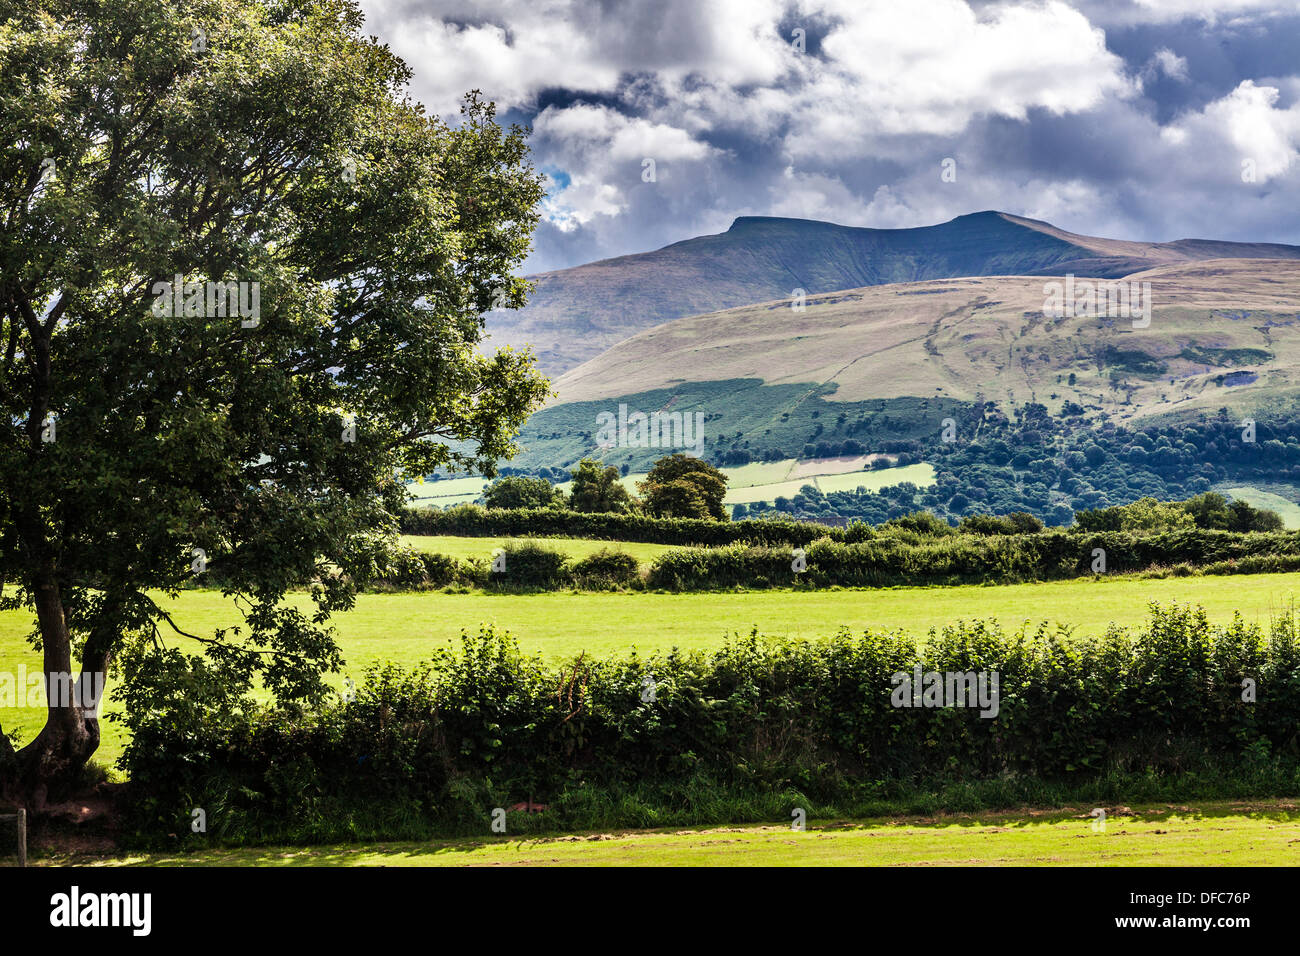 A stormy, showery summer's day in the Brecon Beacons National Park, Wales looking towards Pen y Fan and Corn Du. Stock Photo